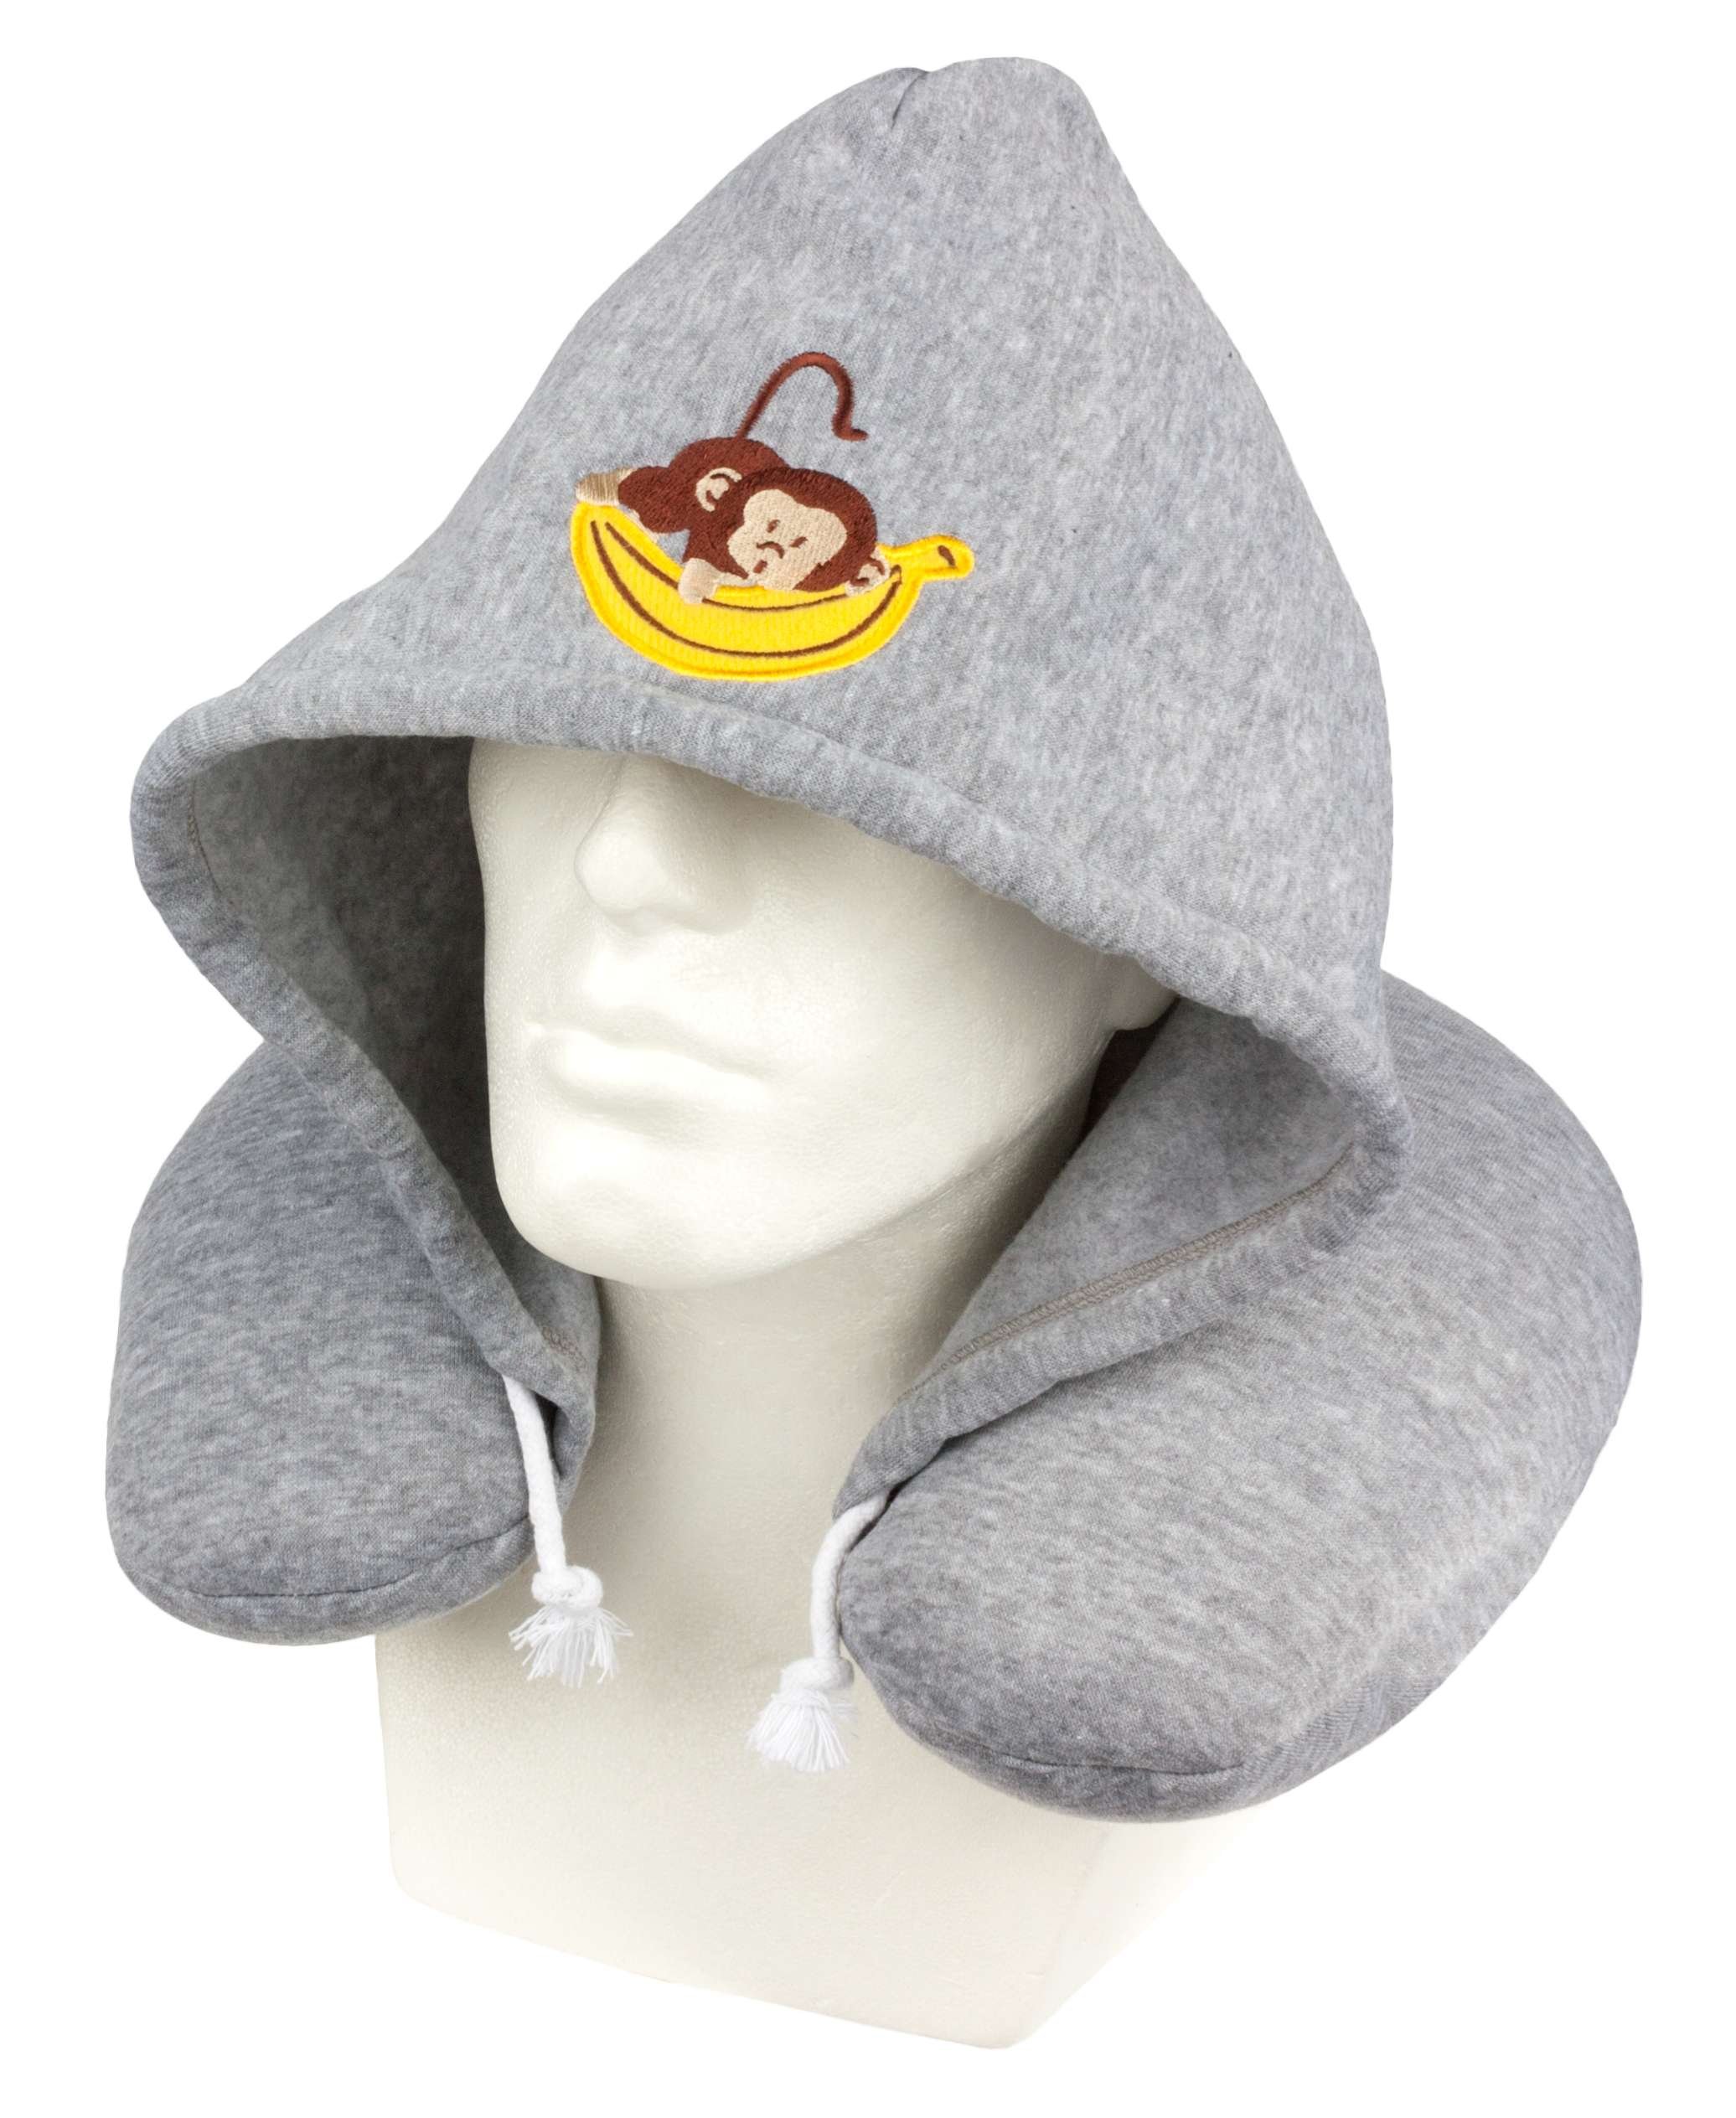 Monkey hooded bolster grey from 5 years